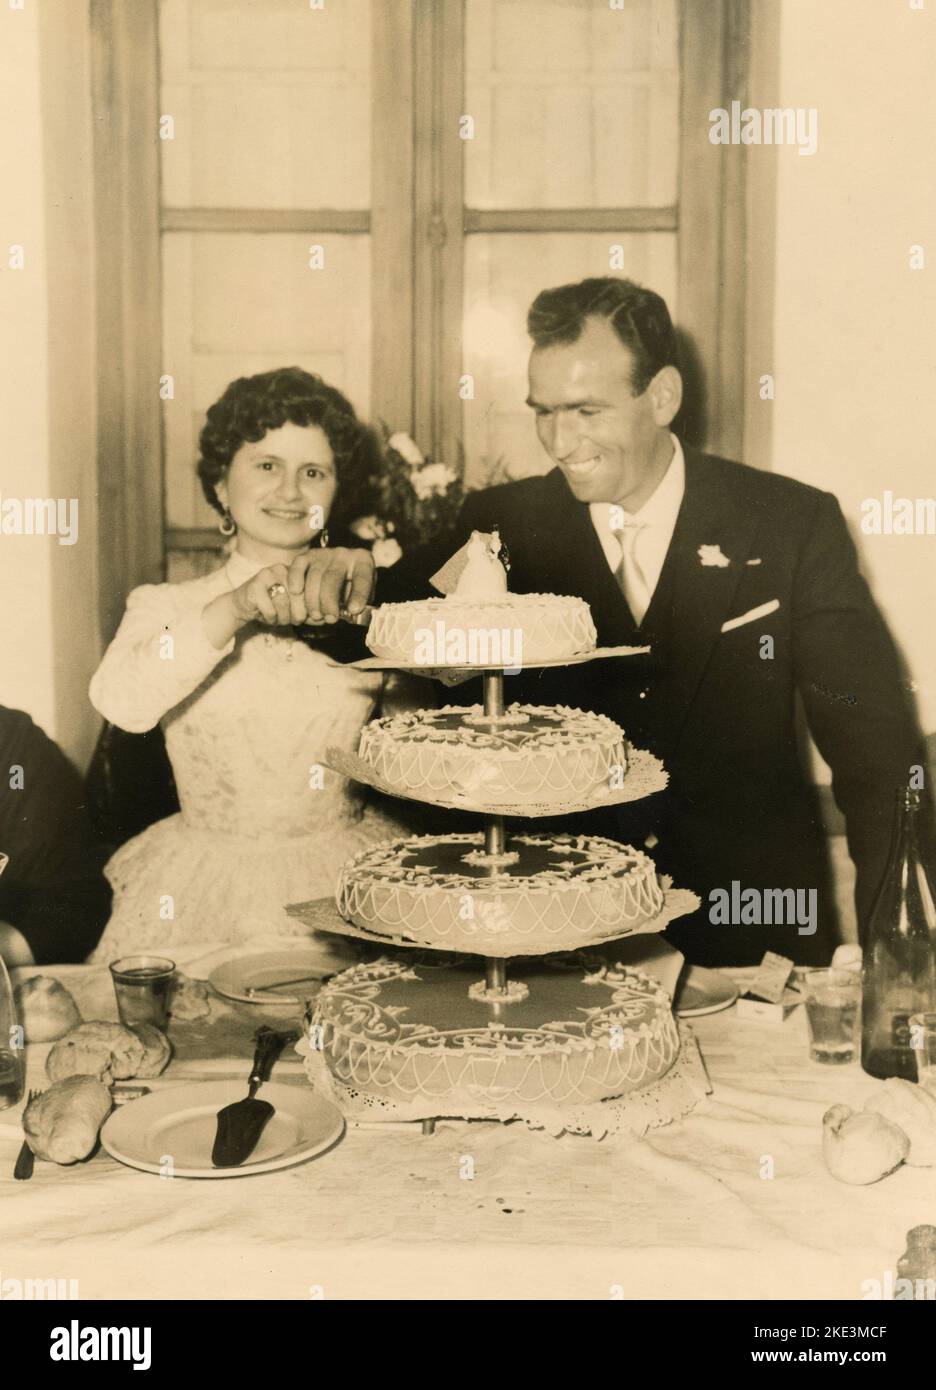 Wedding in a village in central Italy: The Bride and the Groom cutting the cake, 1950s Stock Photo